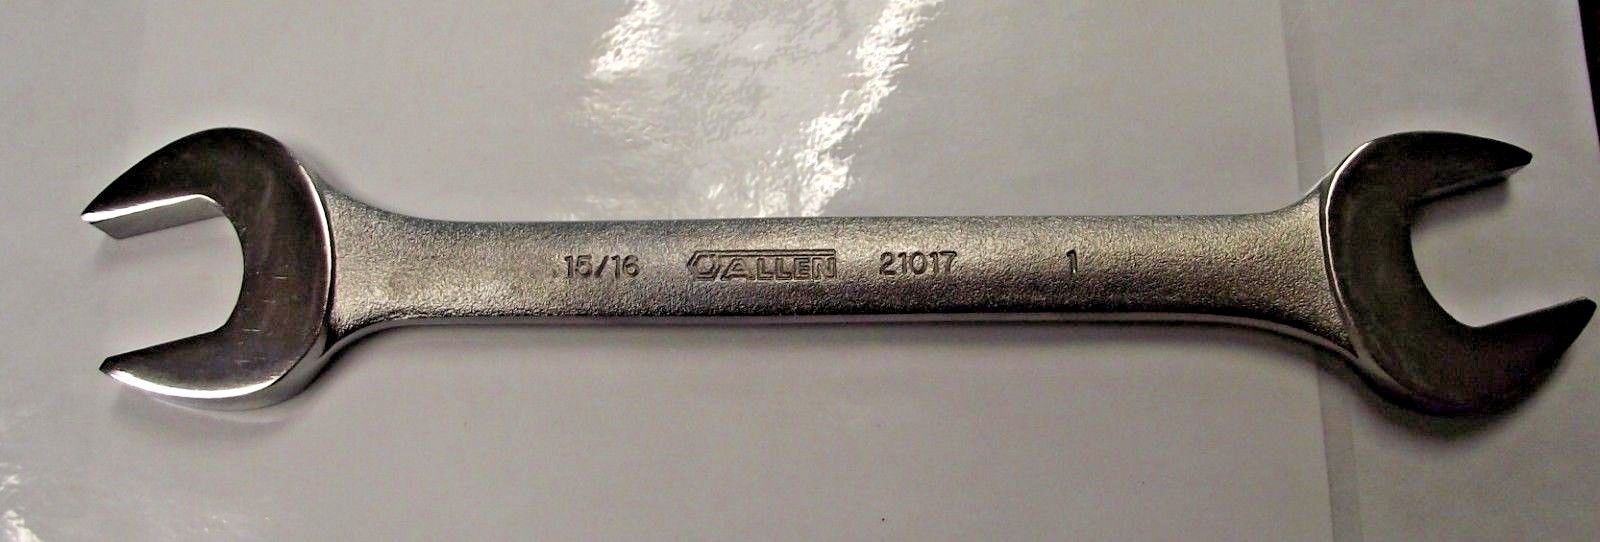 Allen 21017 15/16 x 1" Open End Wrench Satin Finish USA